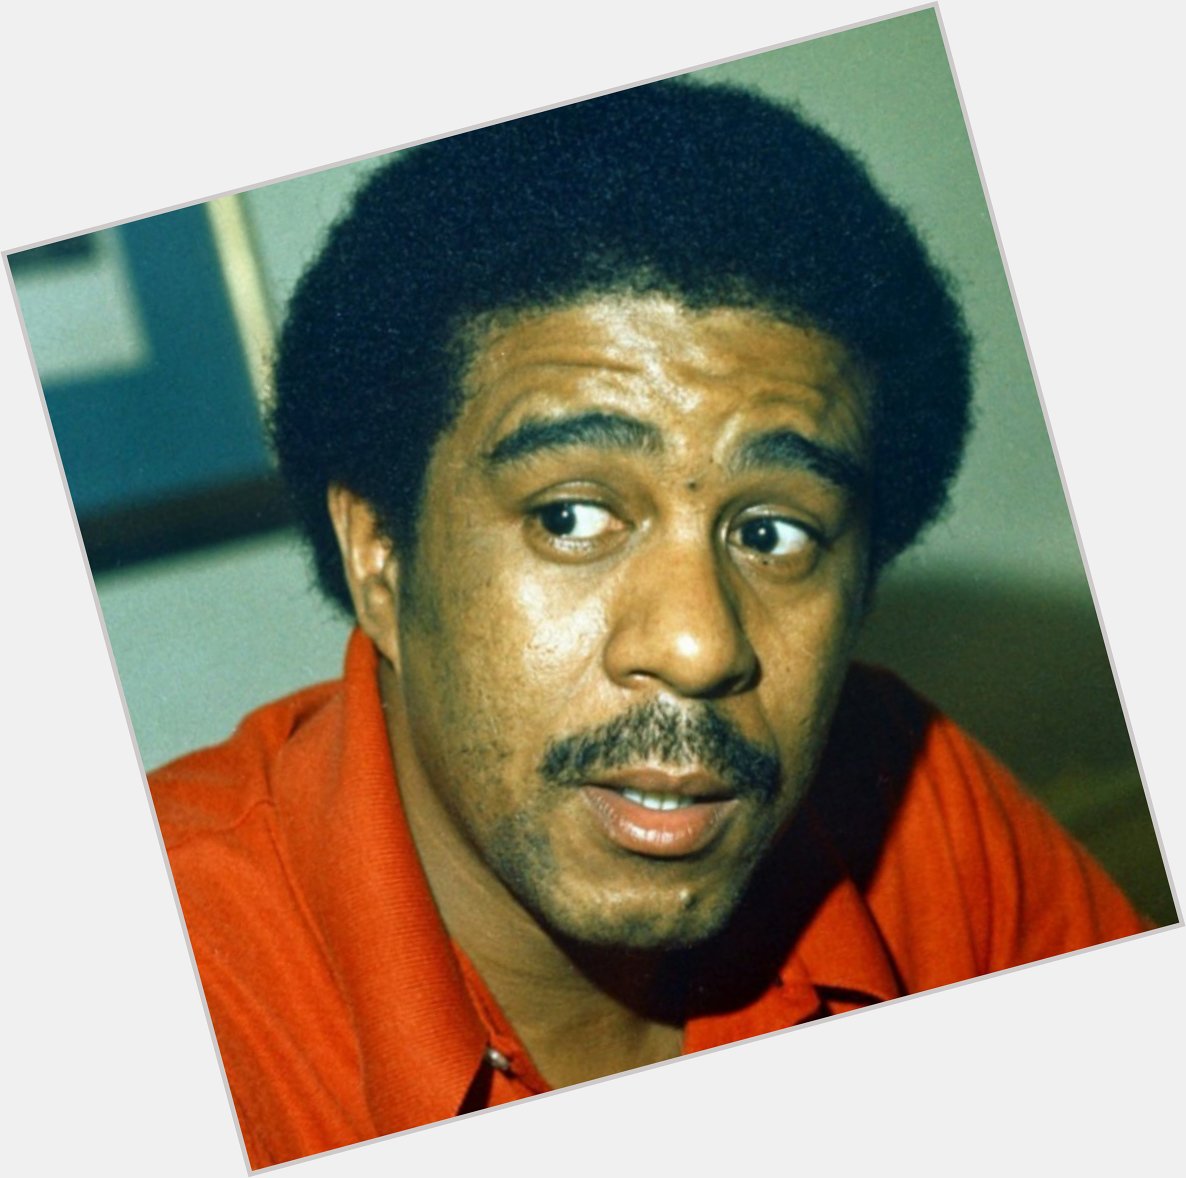 \Show me something natural like afro on Richard Pryor\

One of the best to ever do it. Happy Birthday 